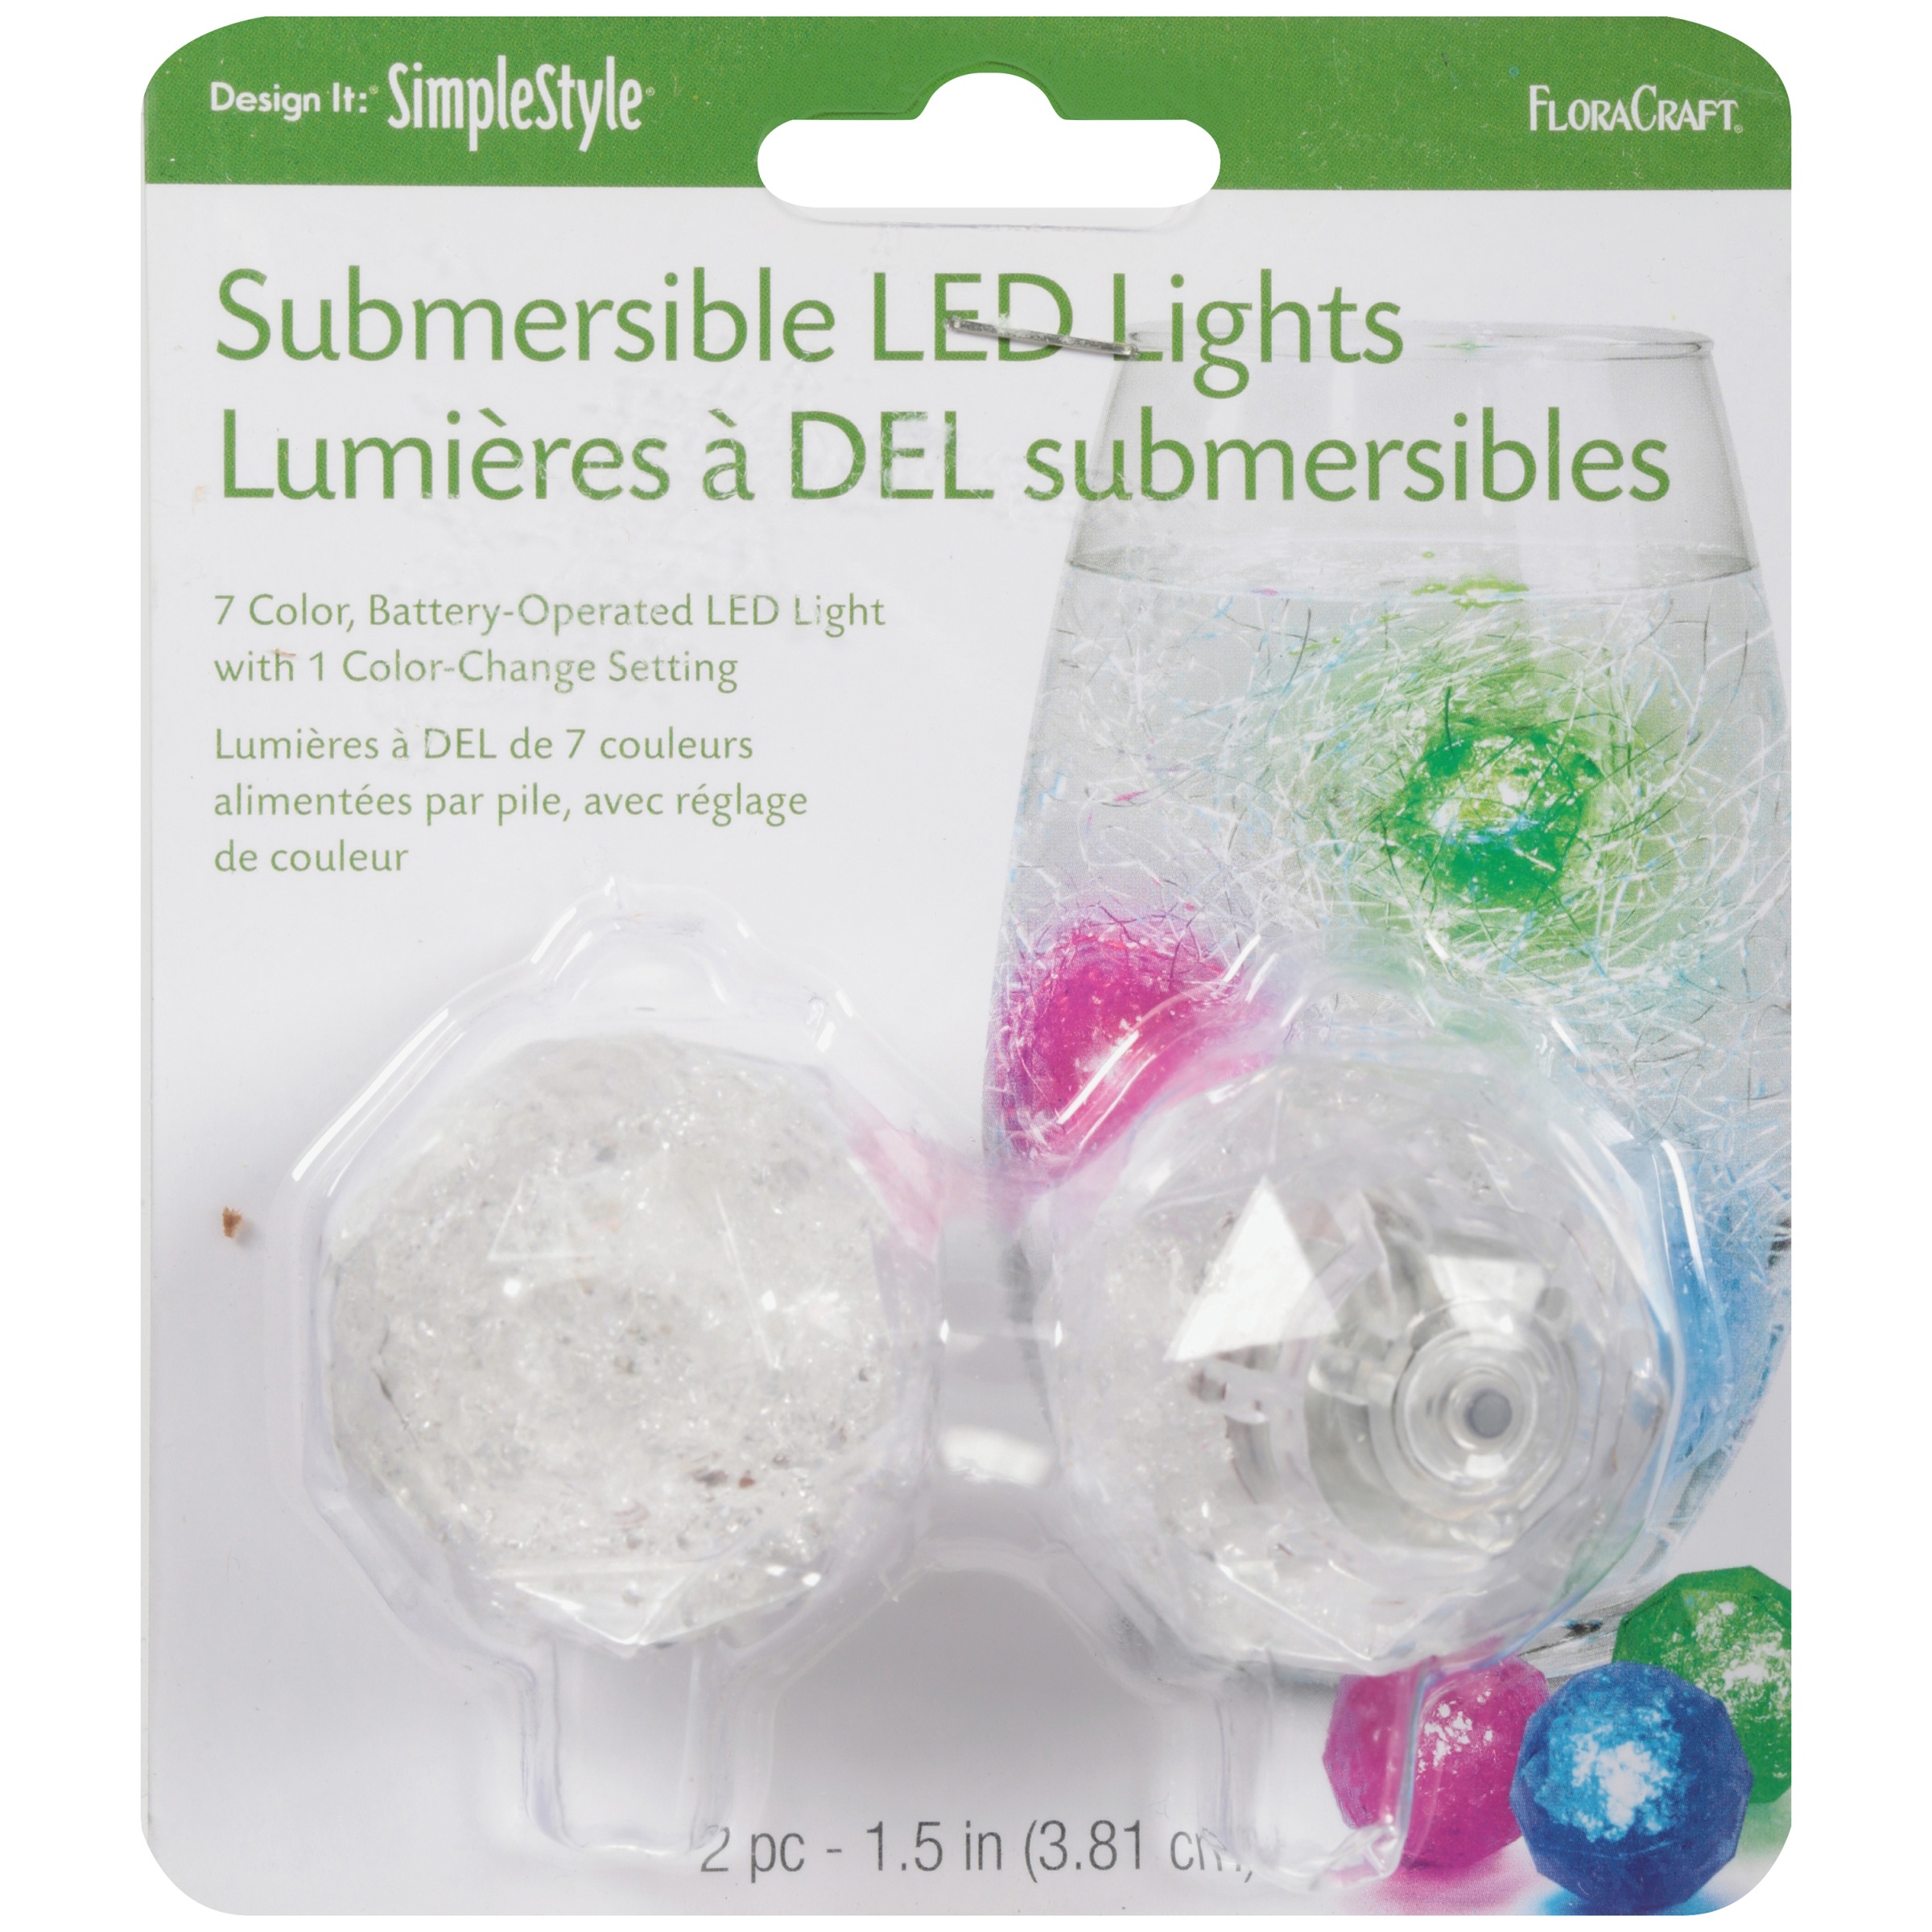 FloraCraft Submersible LED Lights, 2 Count - image 2 of 4